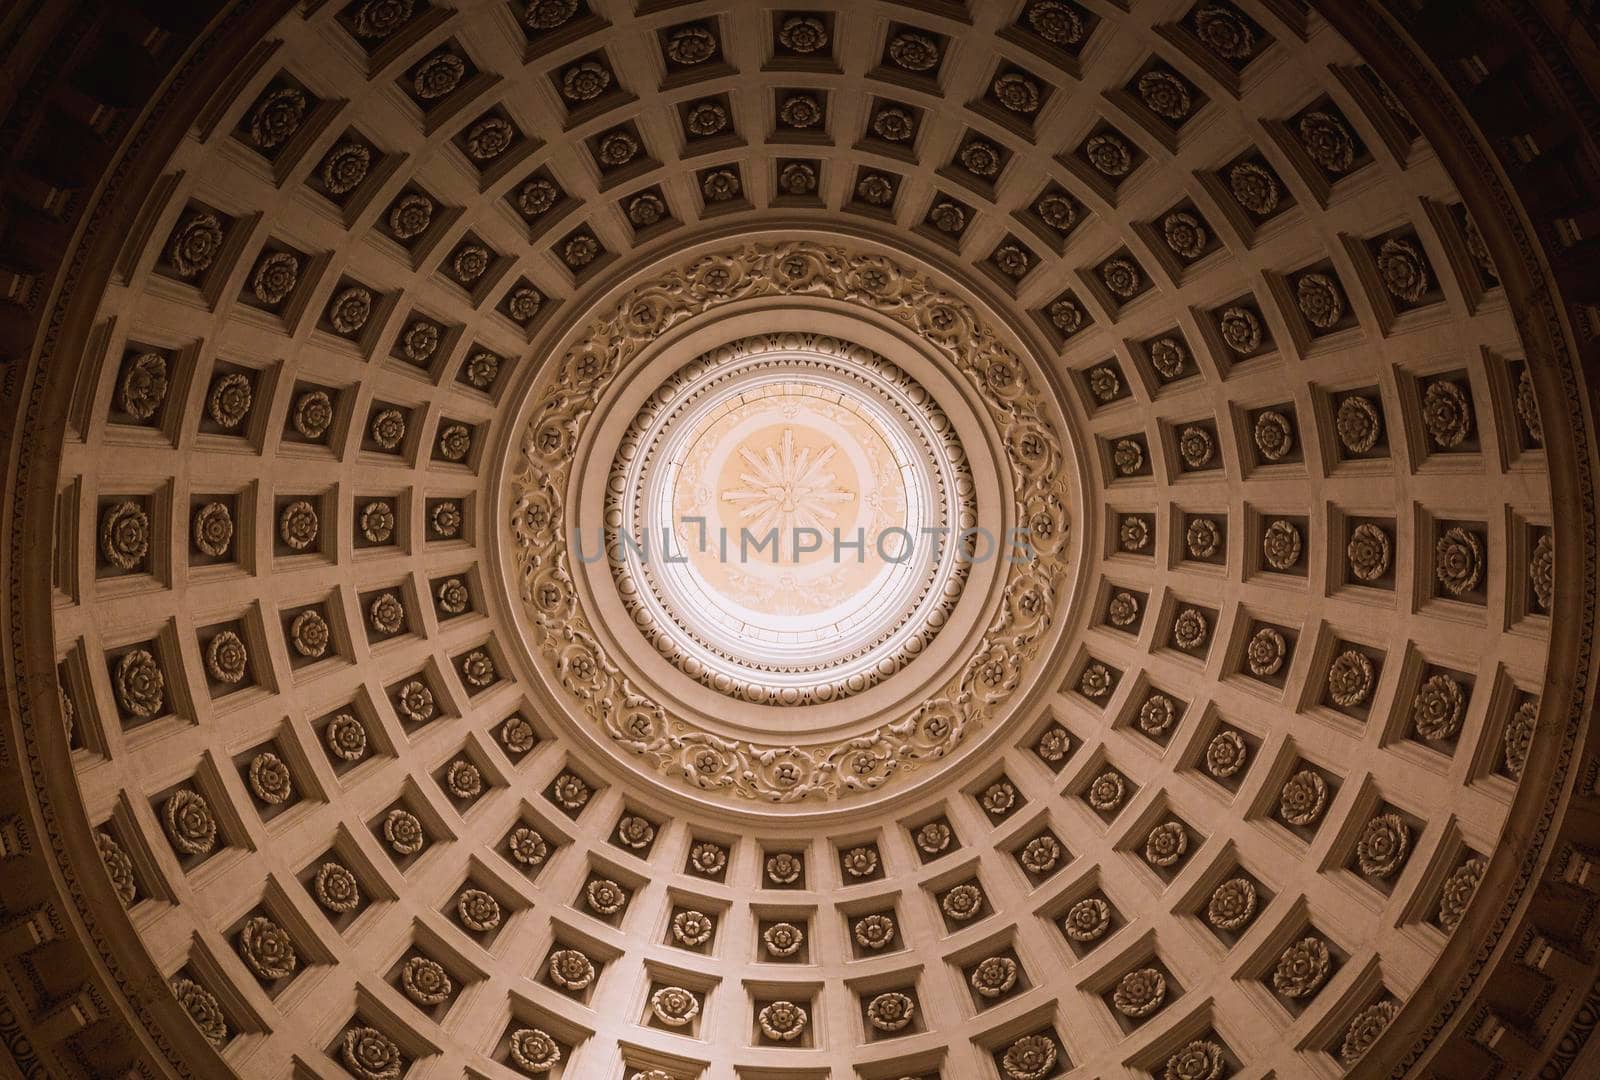 Dome of a church with symmetrical decorations